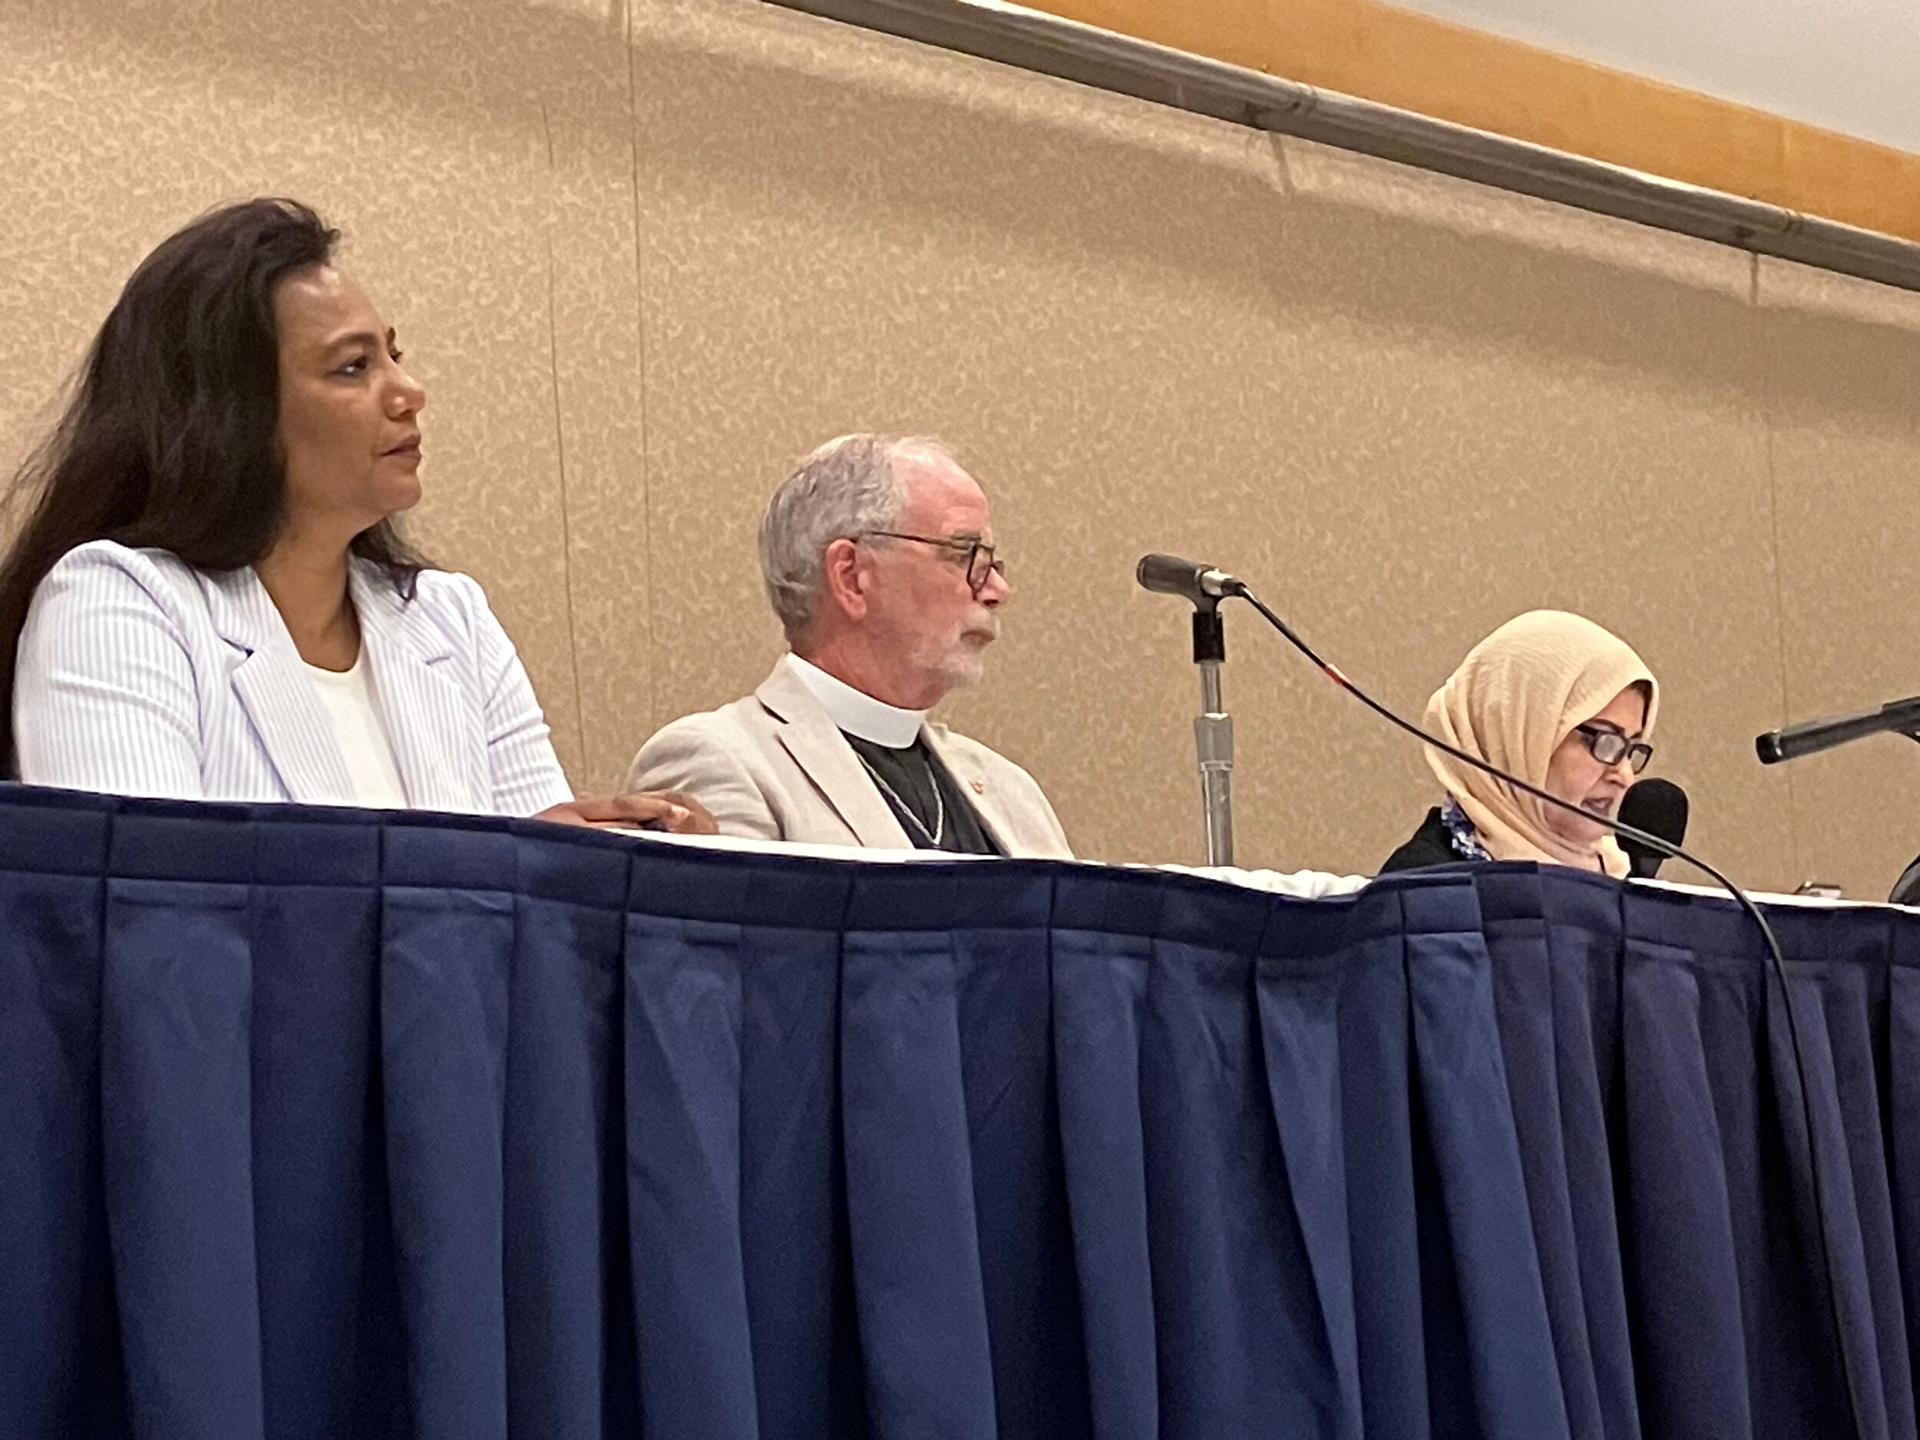 Vijaylakshmi Nadar (left) and Mark Lukens (center) speak on a panel about religious extremism at the Parliament of the World's Religions in Chicago, Aug. 16, 2023.